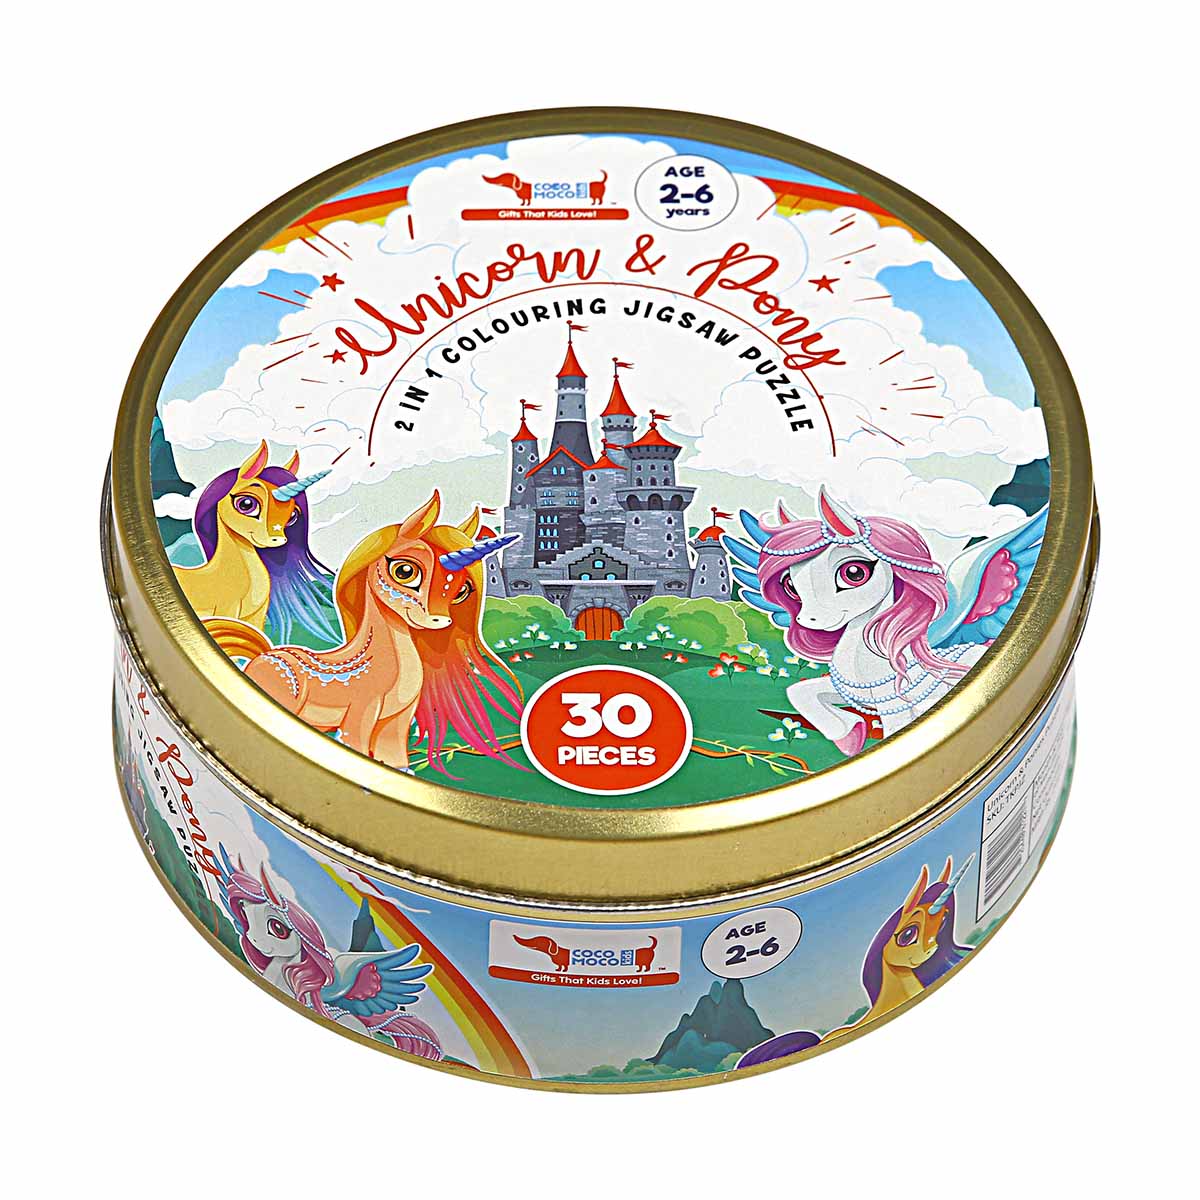 CocoMoco Kids - Unicorn and Pony Jigsaw Puzzle 30 pieces, Return Gift for 2-4, 5-6 year old Kids (multi)